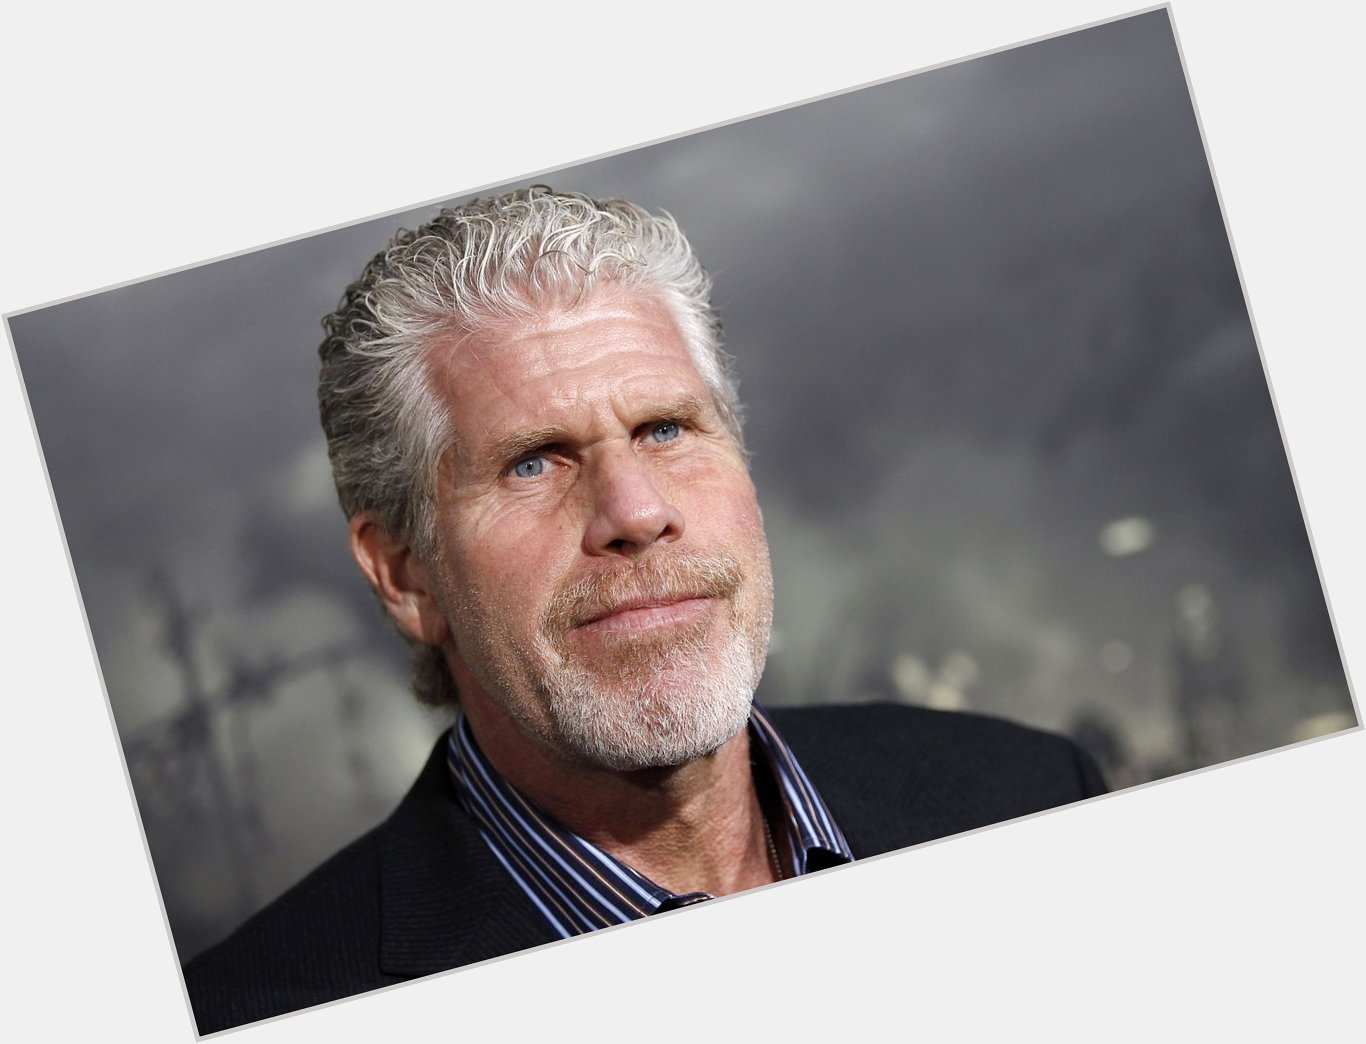 Happy to on a Harley, Ron Perlman, who turns 67 today!  